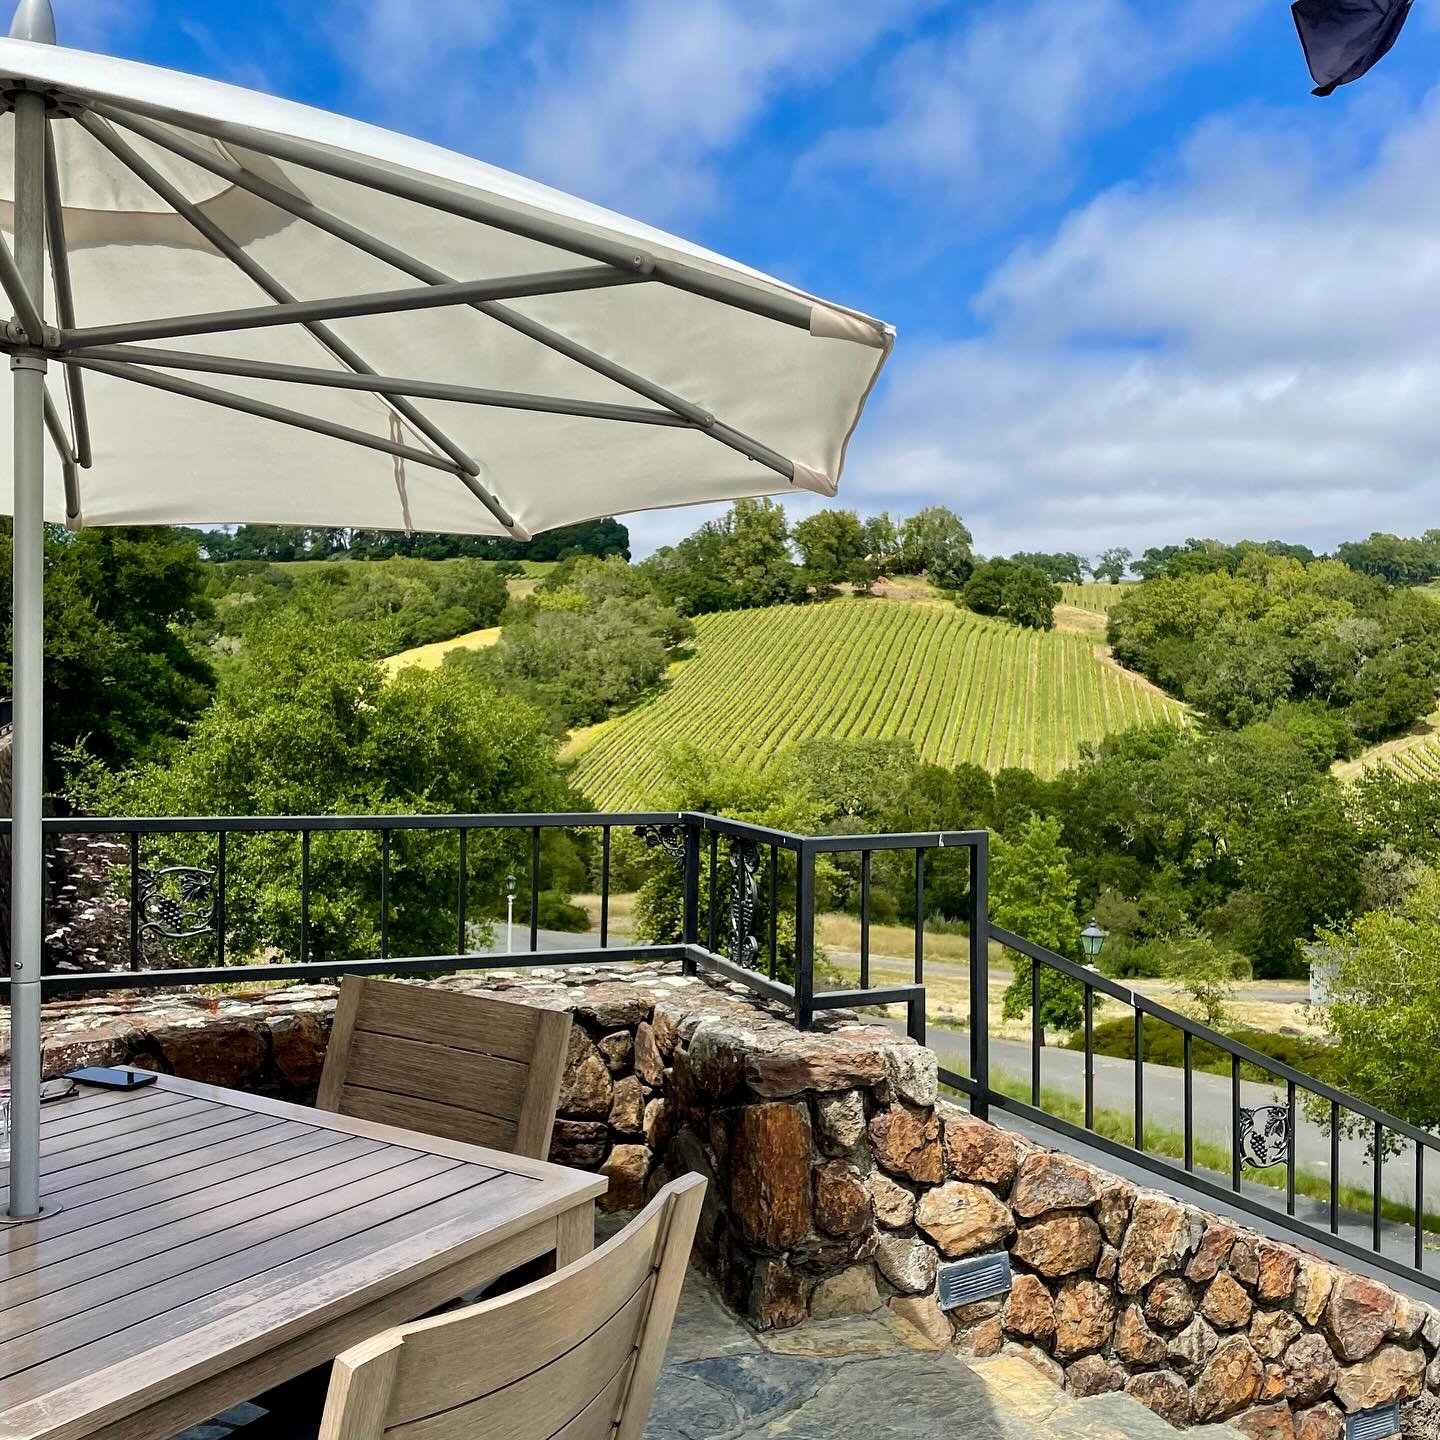 Perfect timing on a sweet, spring getaway to wine country near Healdsburg. ☀️ Thank you to some of our old and new favorites in wine country! @chalkhillestate @hotellesmarsofficial @bravasbardetapas @foleyfoodandwinesociety @rooftop106 @guisolatinfus